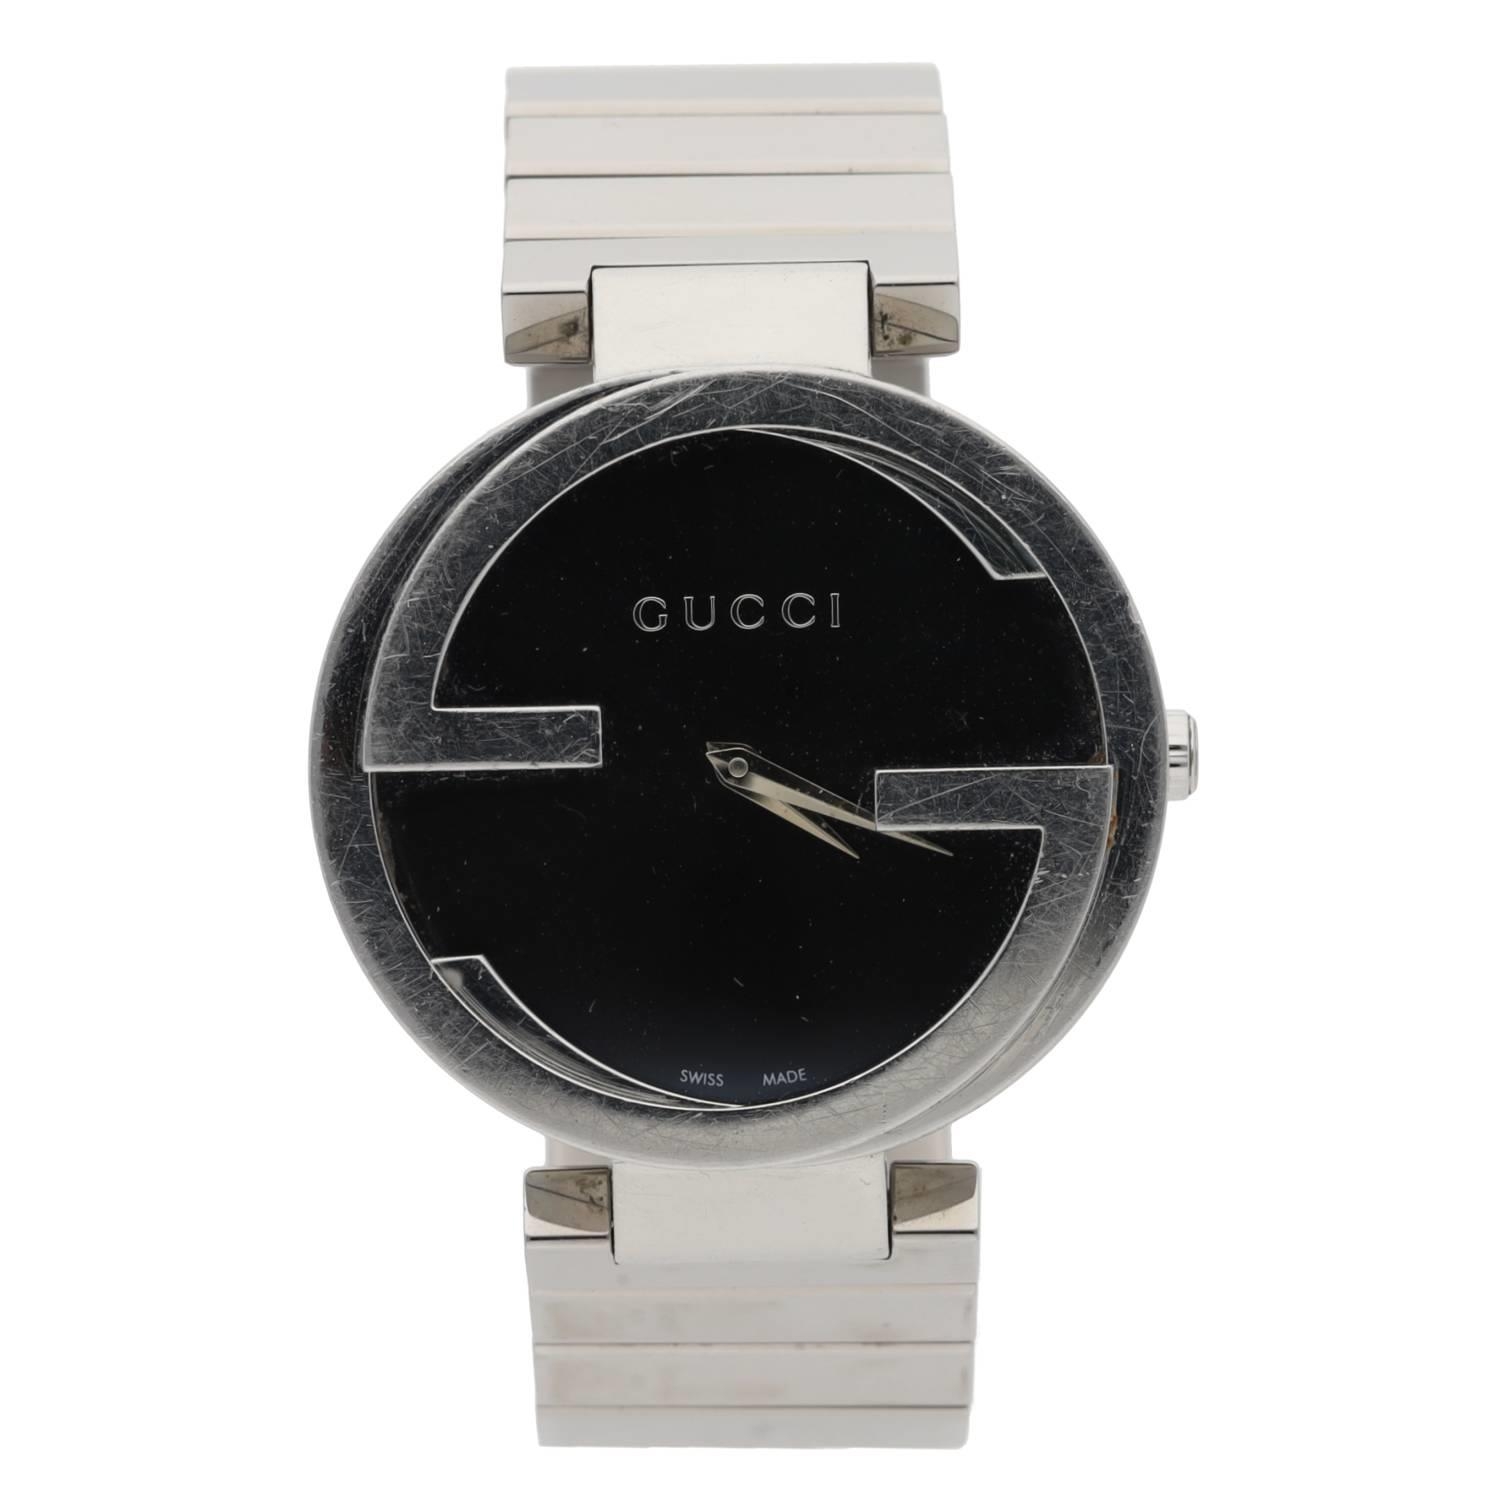 Gucci stainless steel wristwatch, reference no. 133.3, black dial, quartz, Gucci bracelet with